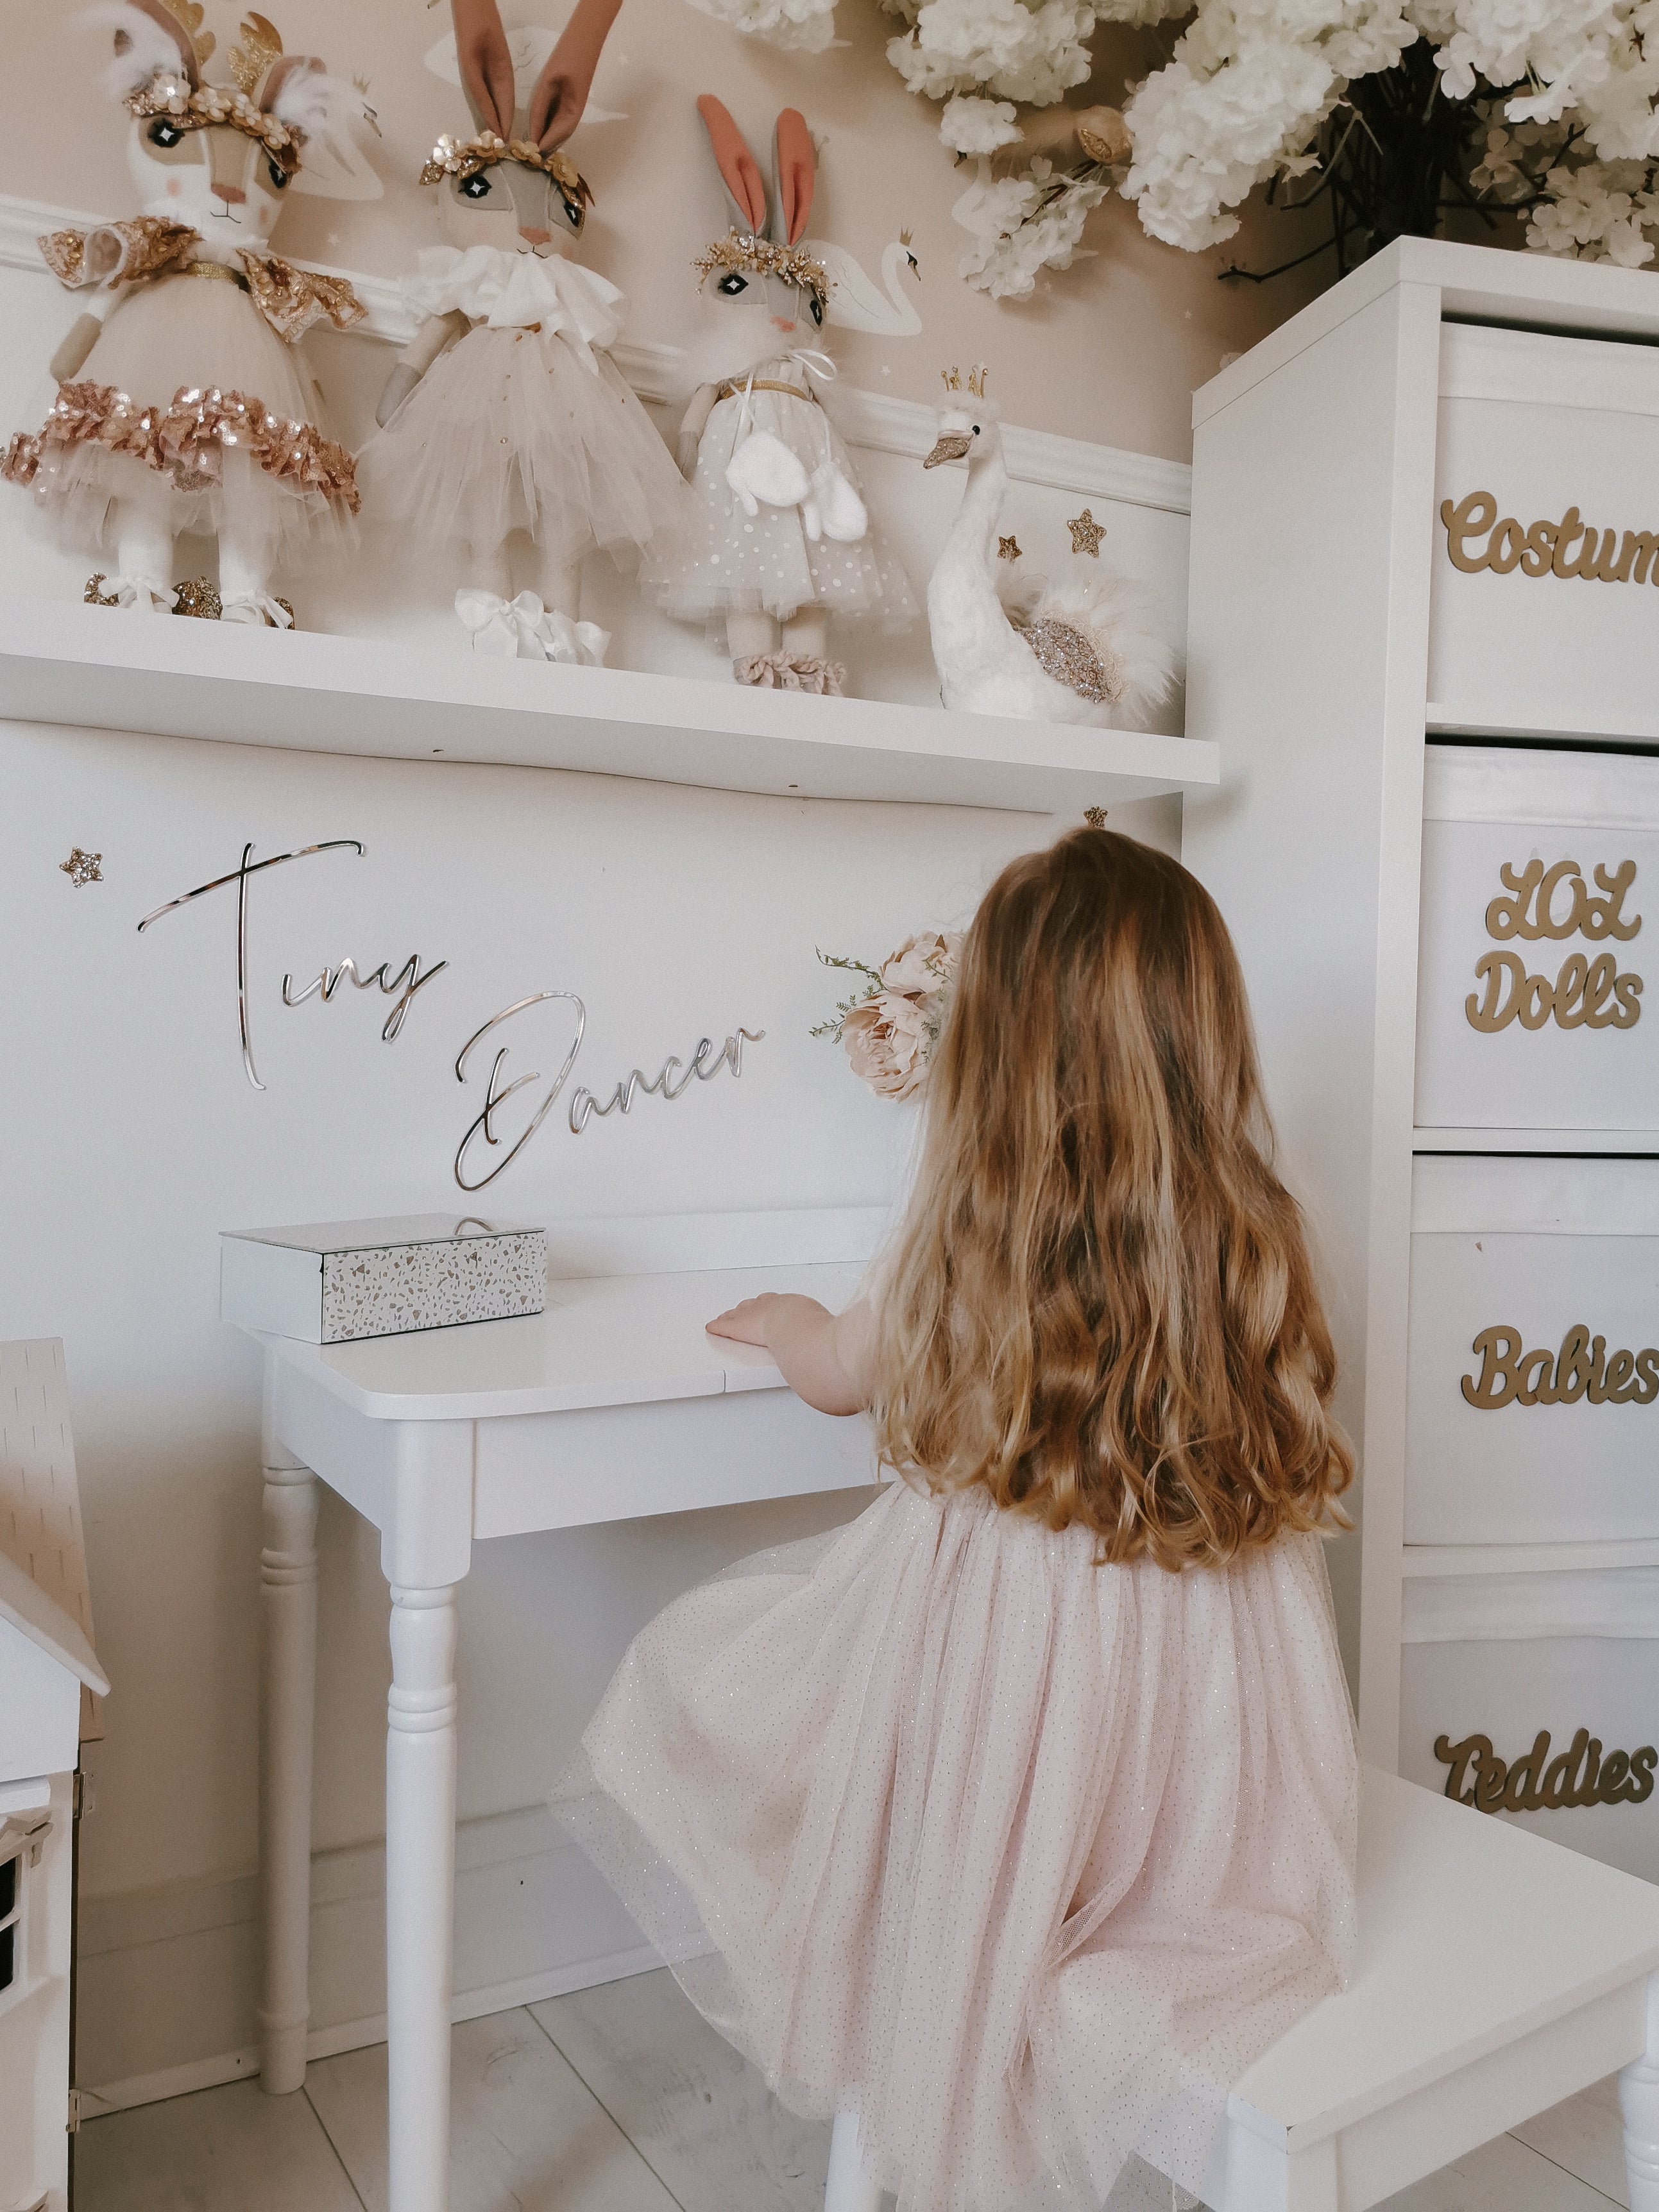 "Tiny Dancer" Mirrored Wall Quote